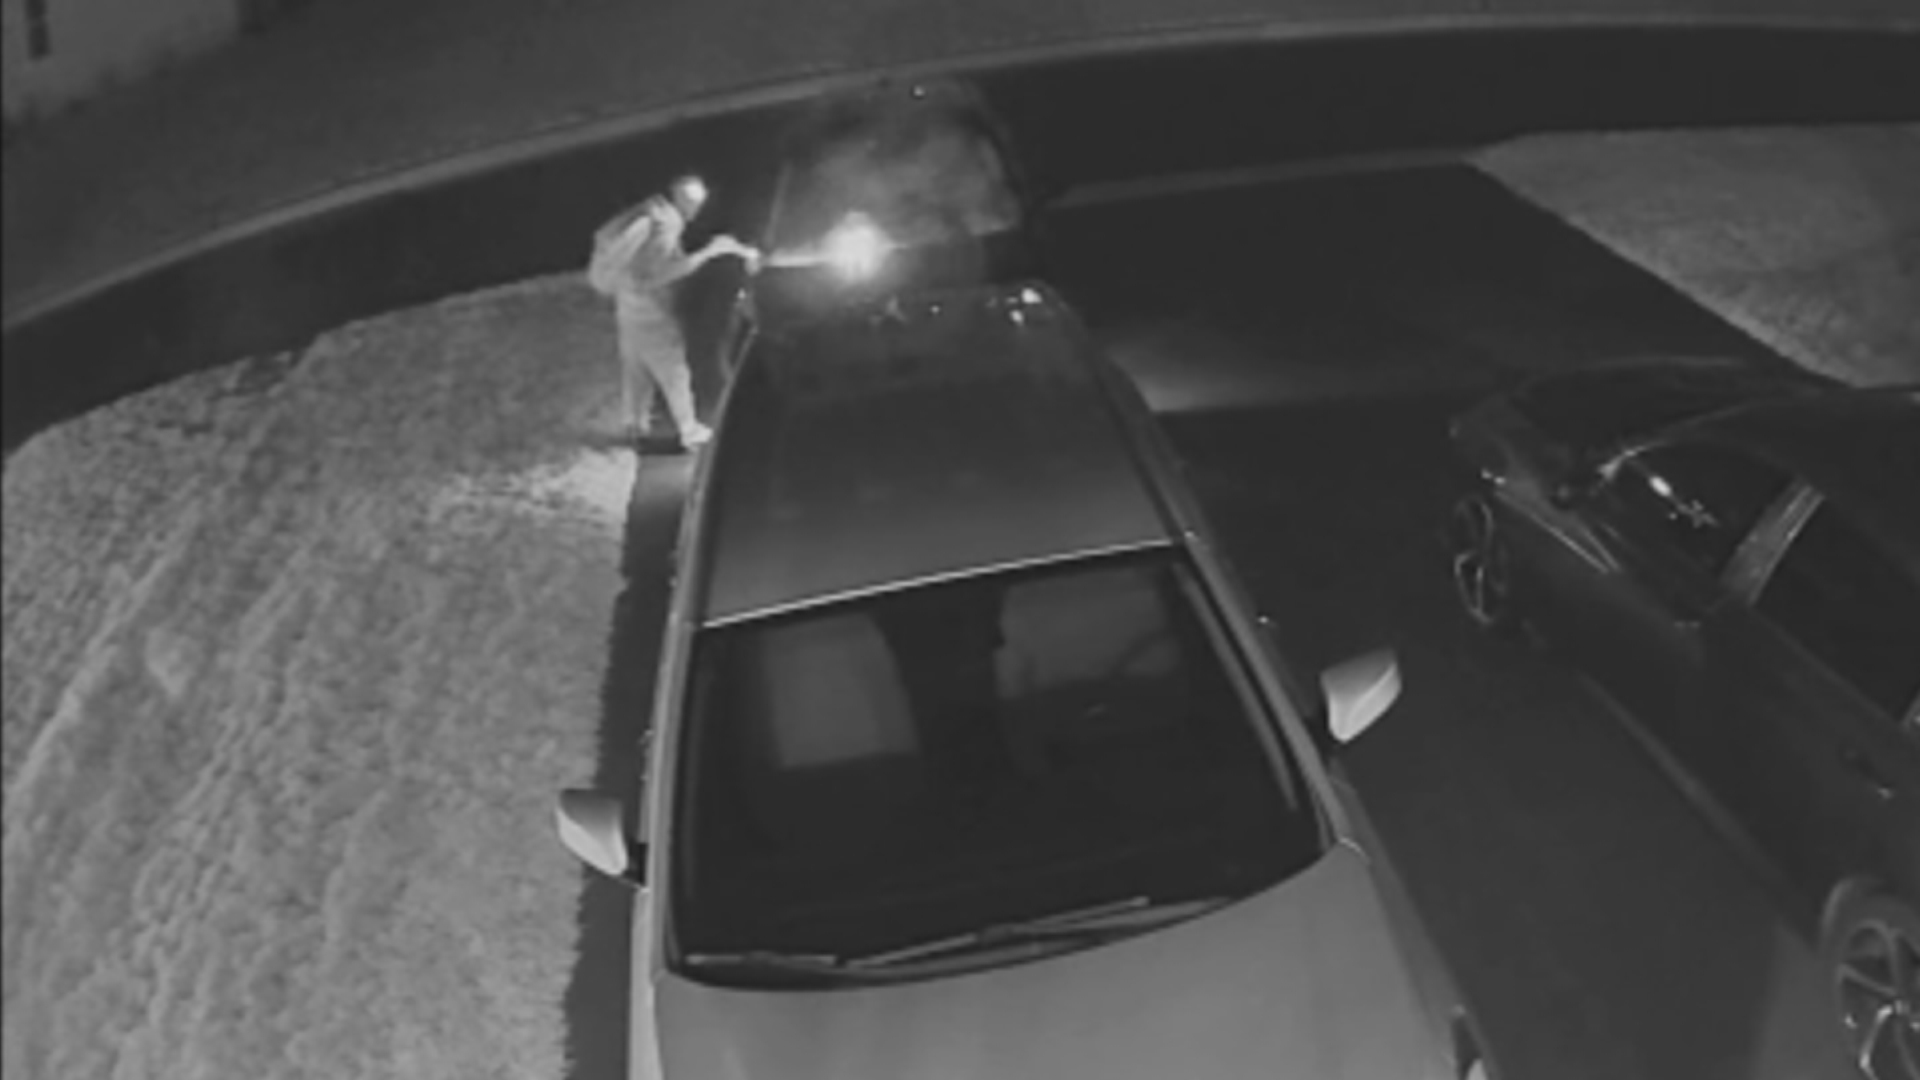 Suspect Wanted In Connection With Vehicle Arsons In Delaware